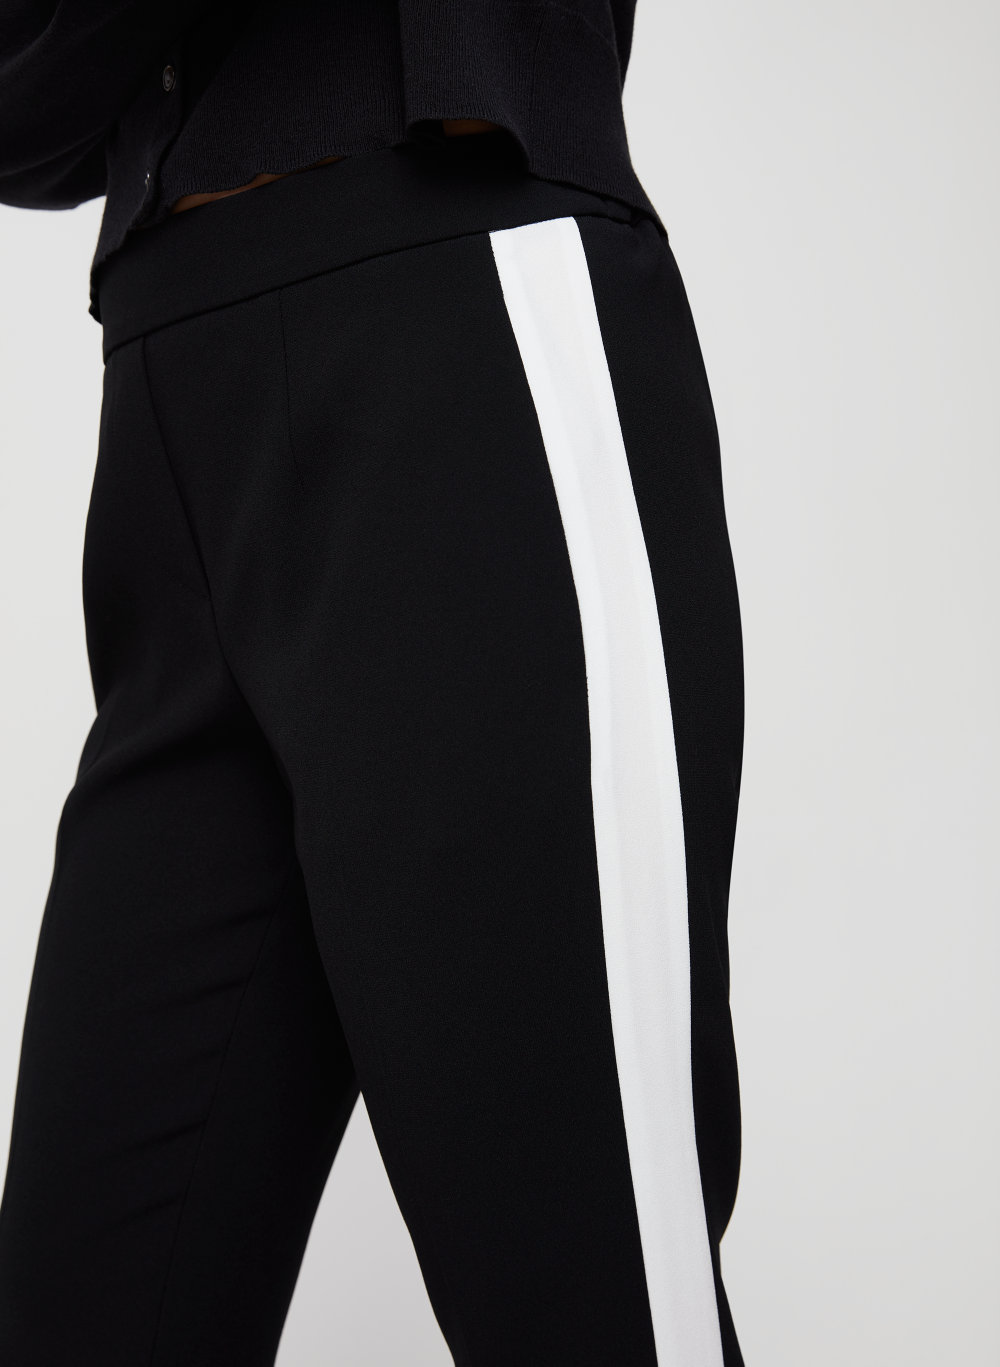 black pants with white stripe on side